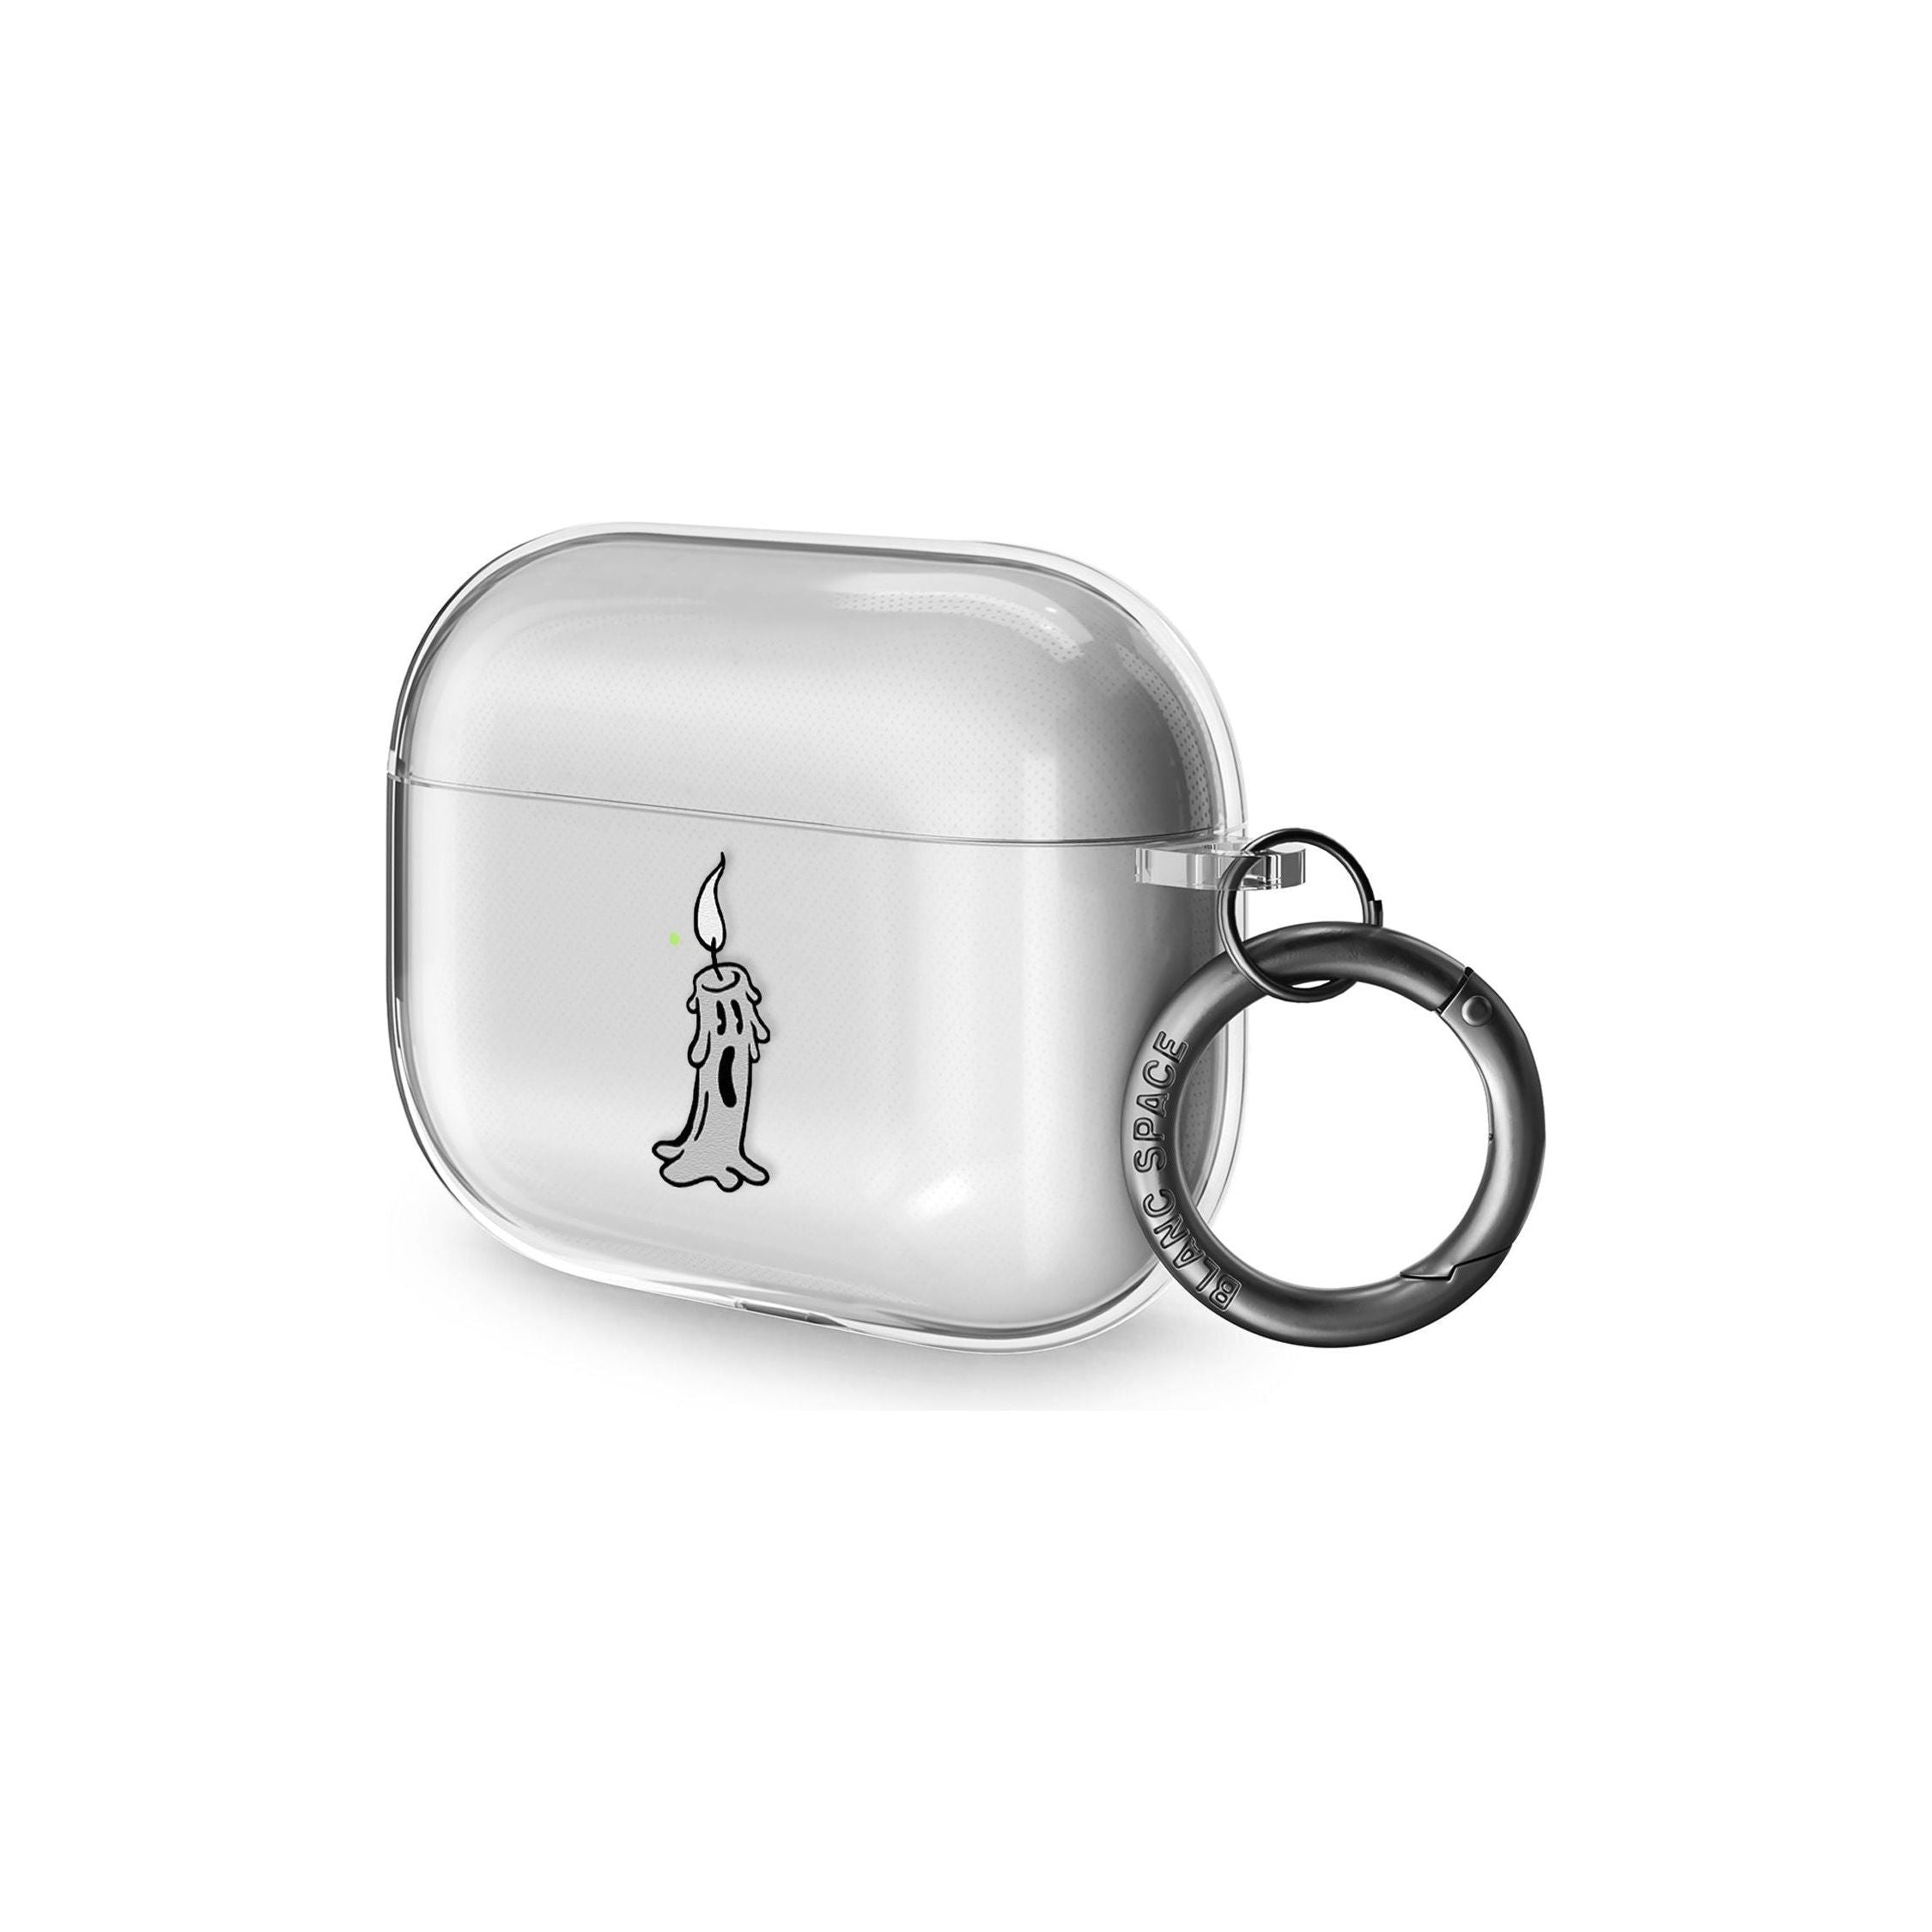  AirPods Pro Case